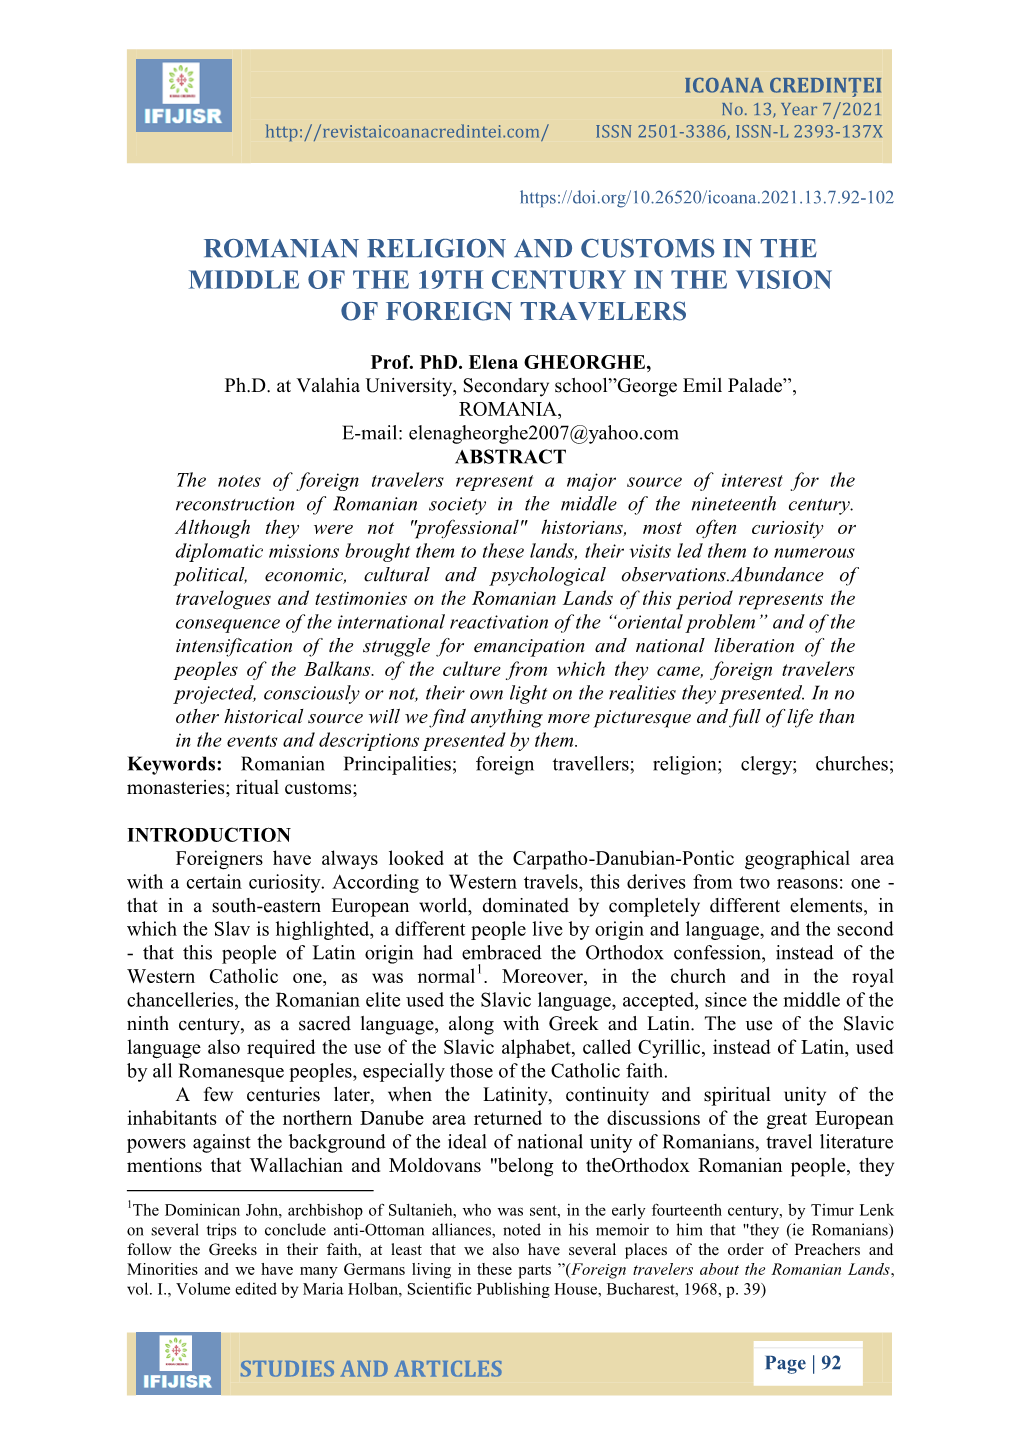 Romanian Religion and Customs in the Middle of the 19Th Century in the Vision of Foreign Travelers